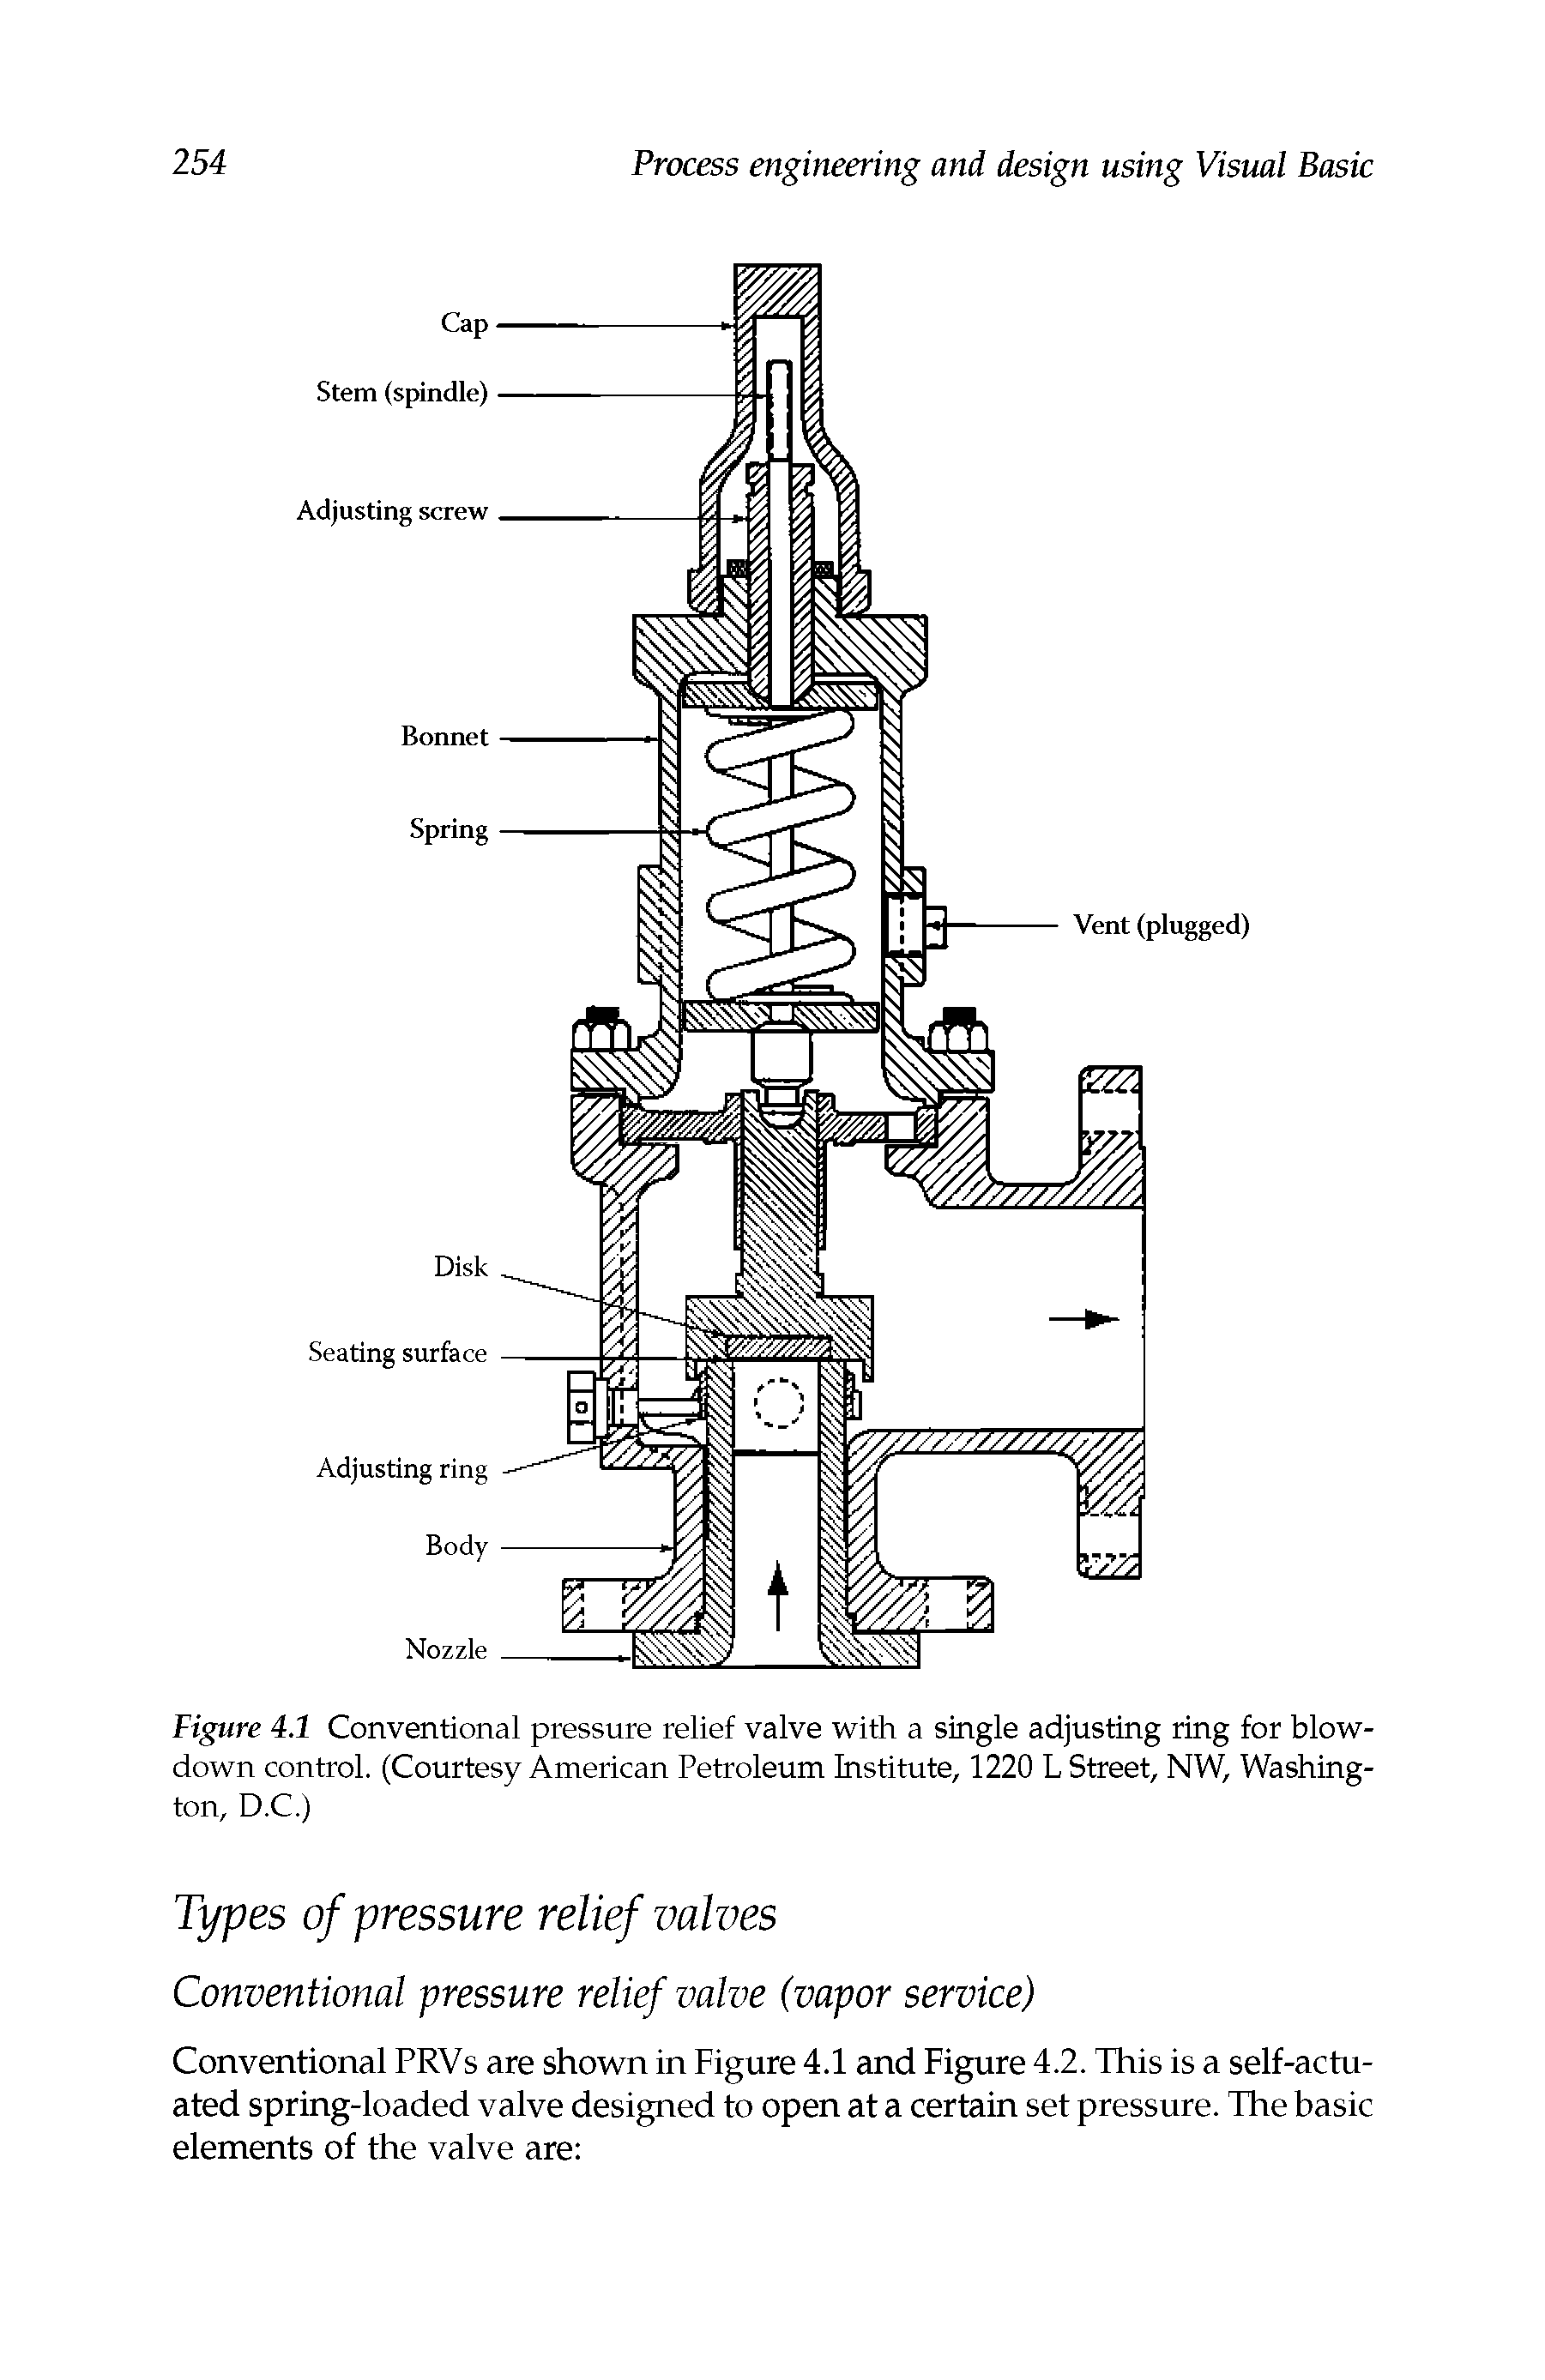 Figure 4.1 Conventional pressure relief valve with a single adjusting ring for blowdown control. (Courtesy Anterican Petroleum Institute, 1220 L Street, NW, Washington, D.C.)...